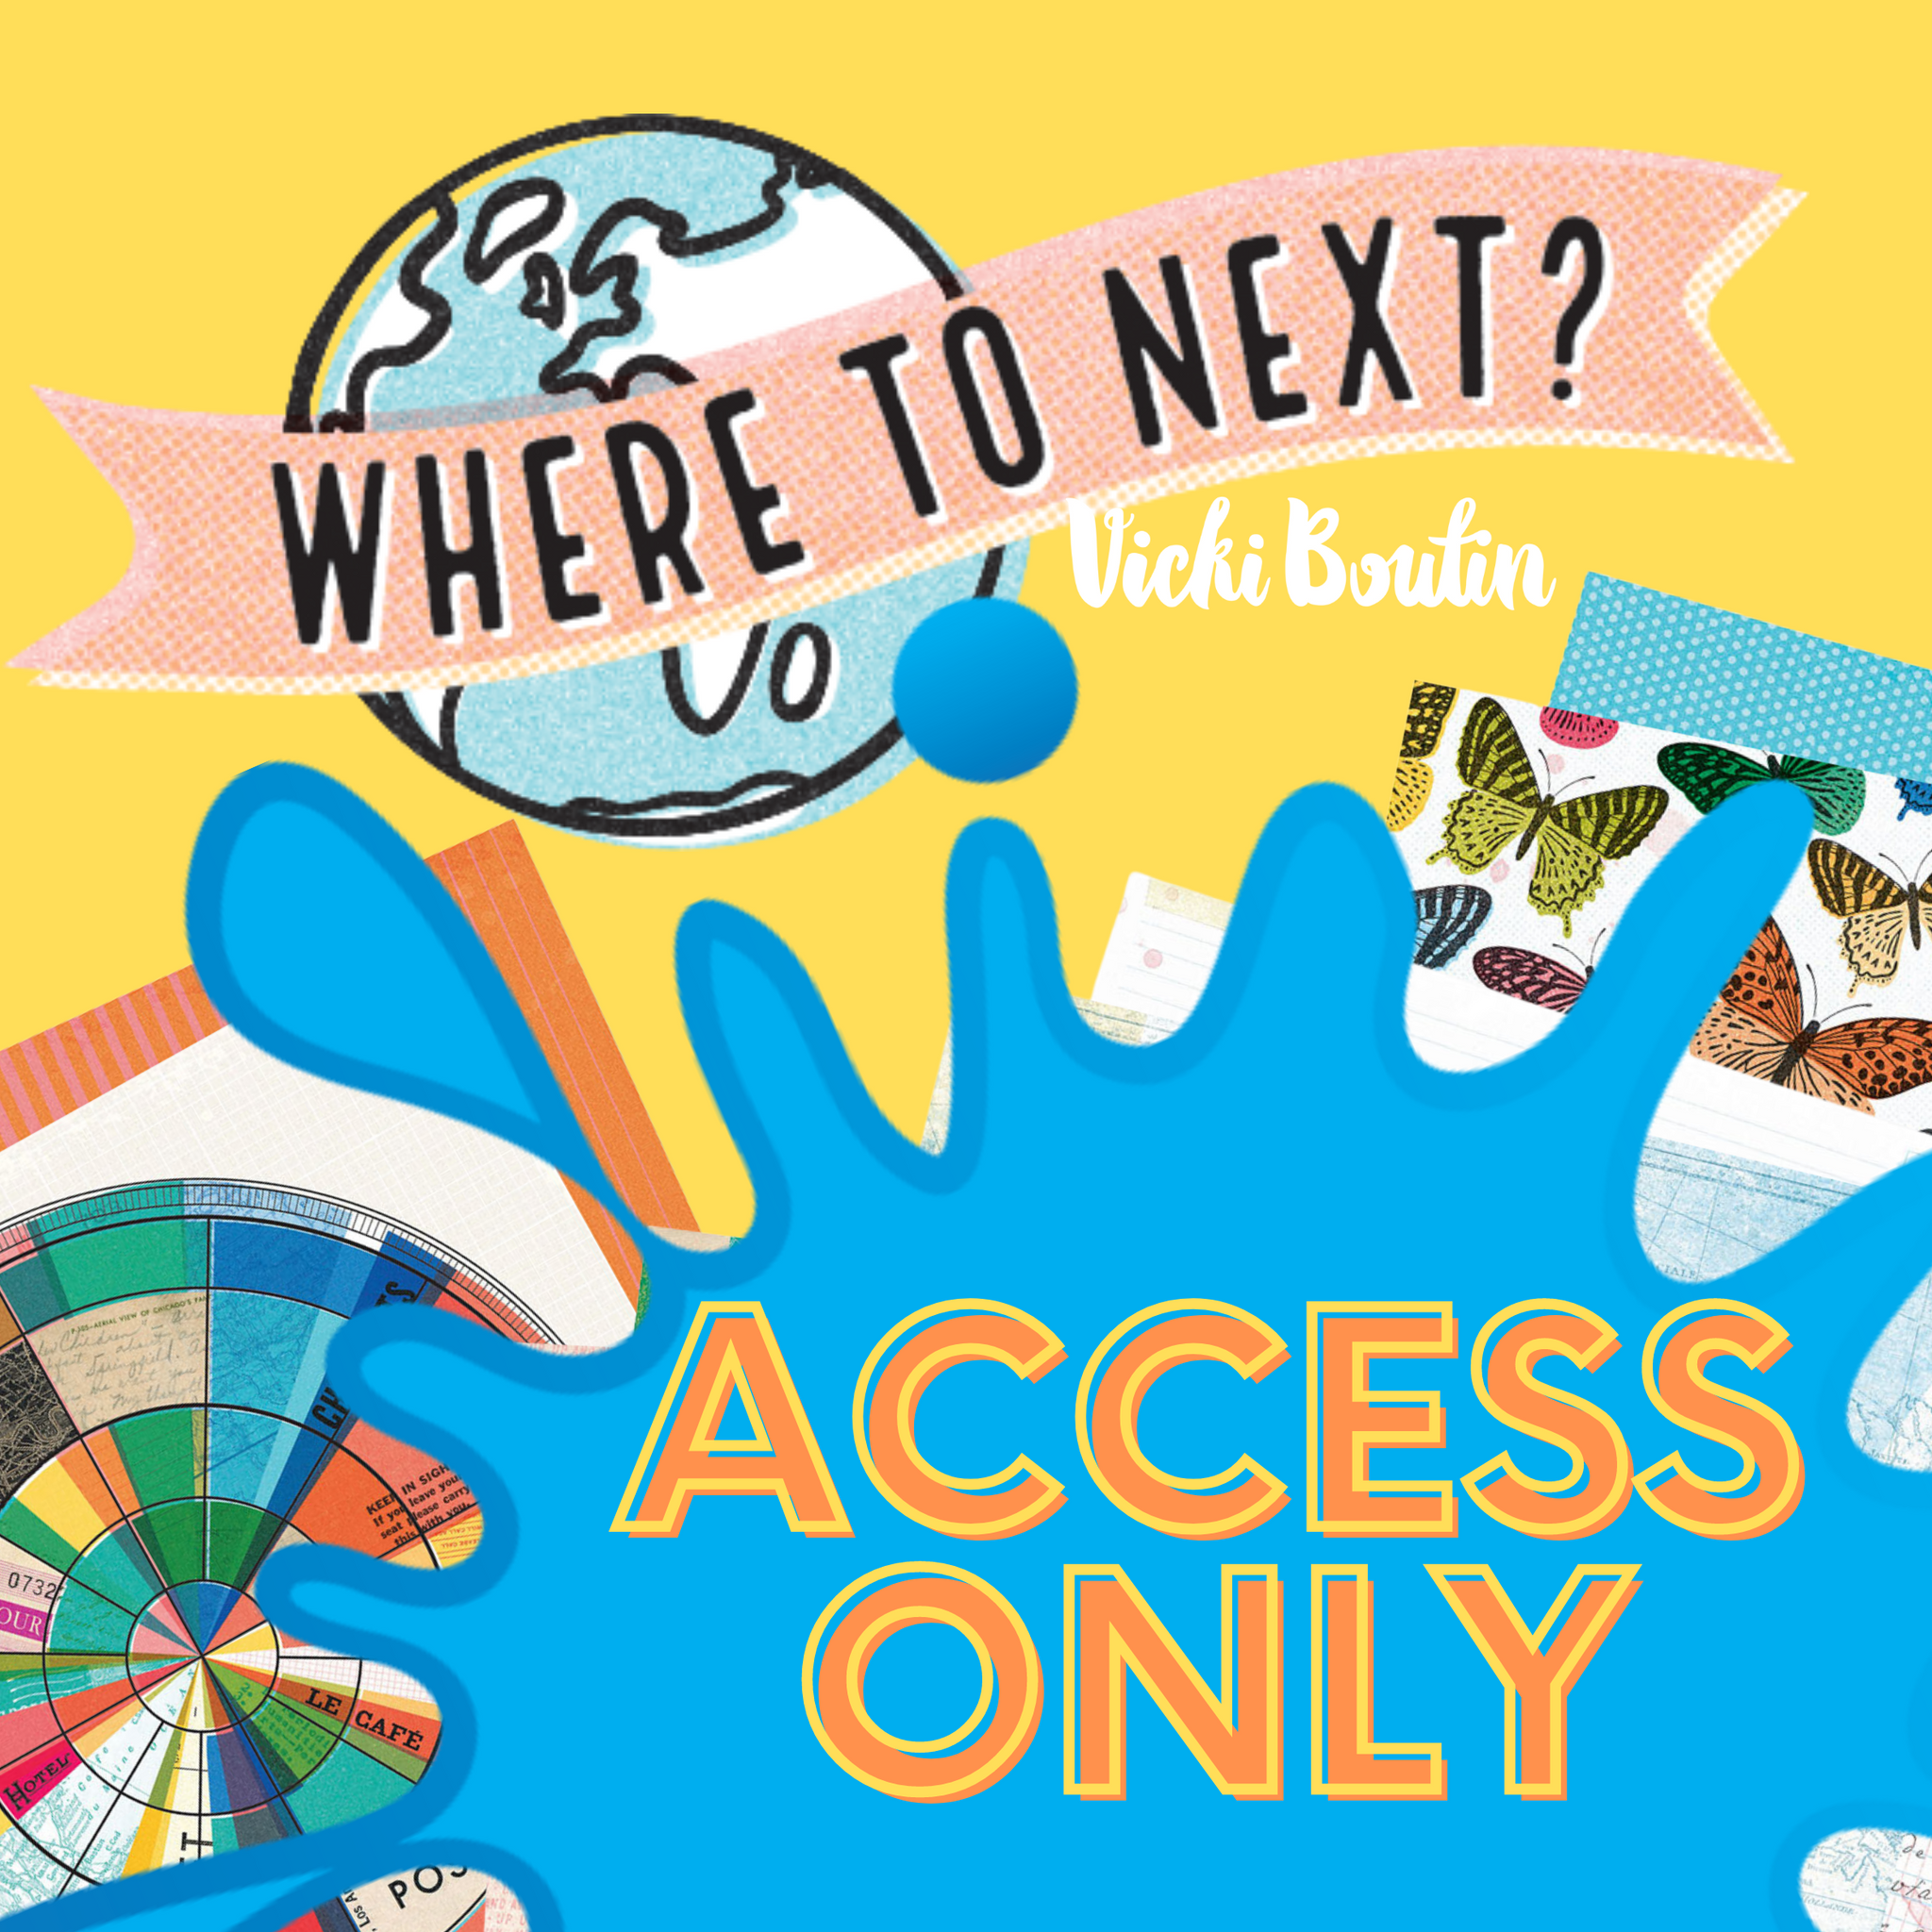 Where To Next Weekend Event- ACCESS ONLY!!!